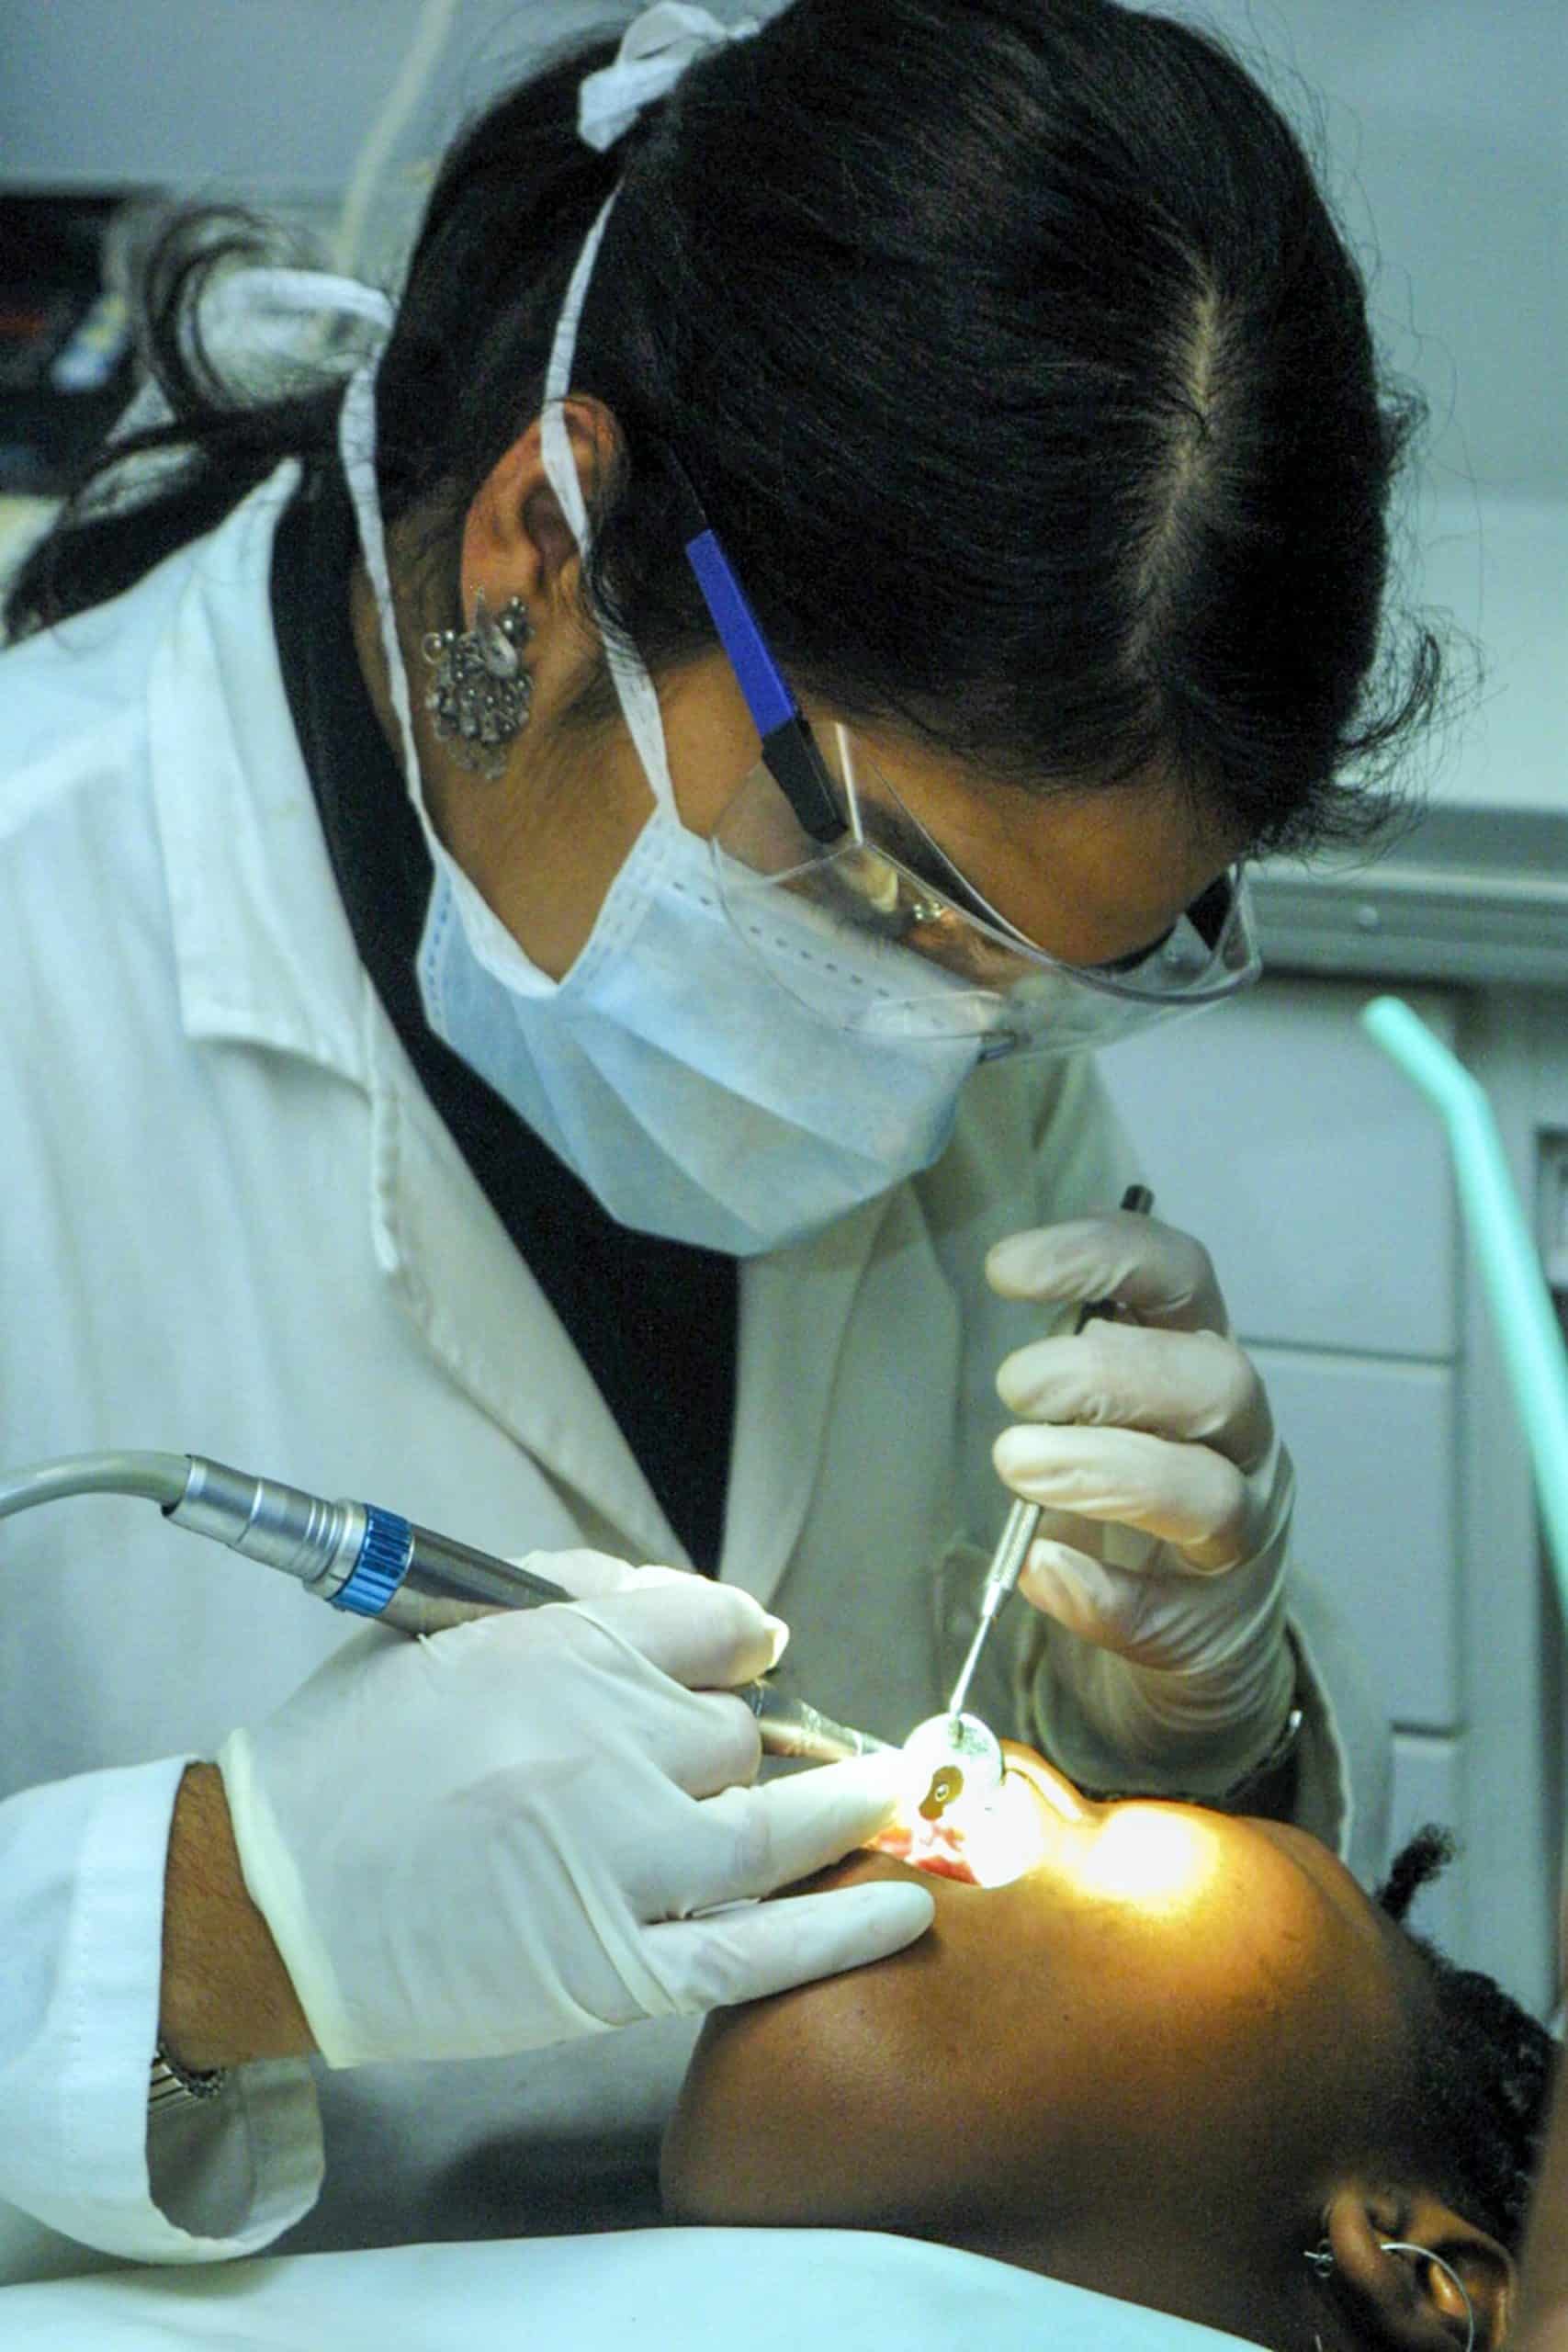 Dental Care Developing Countries Article Image